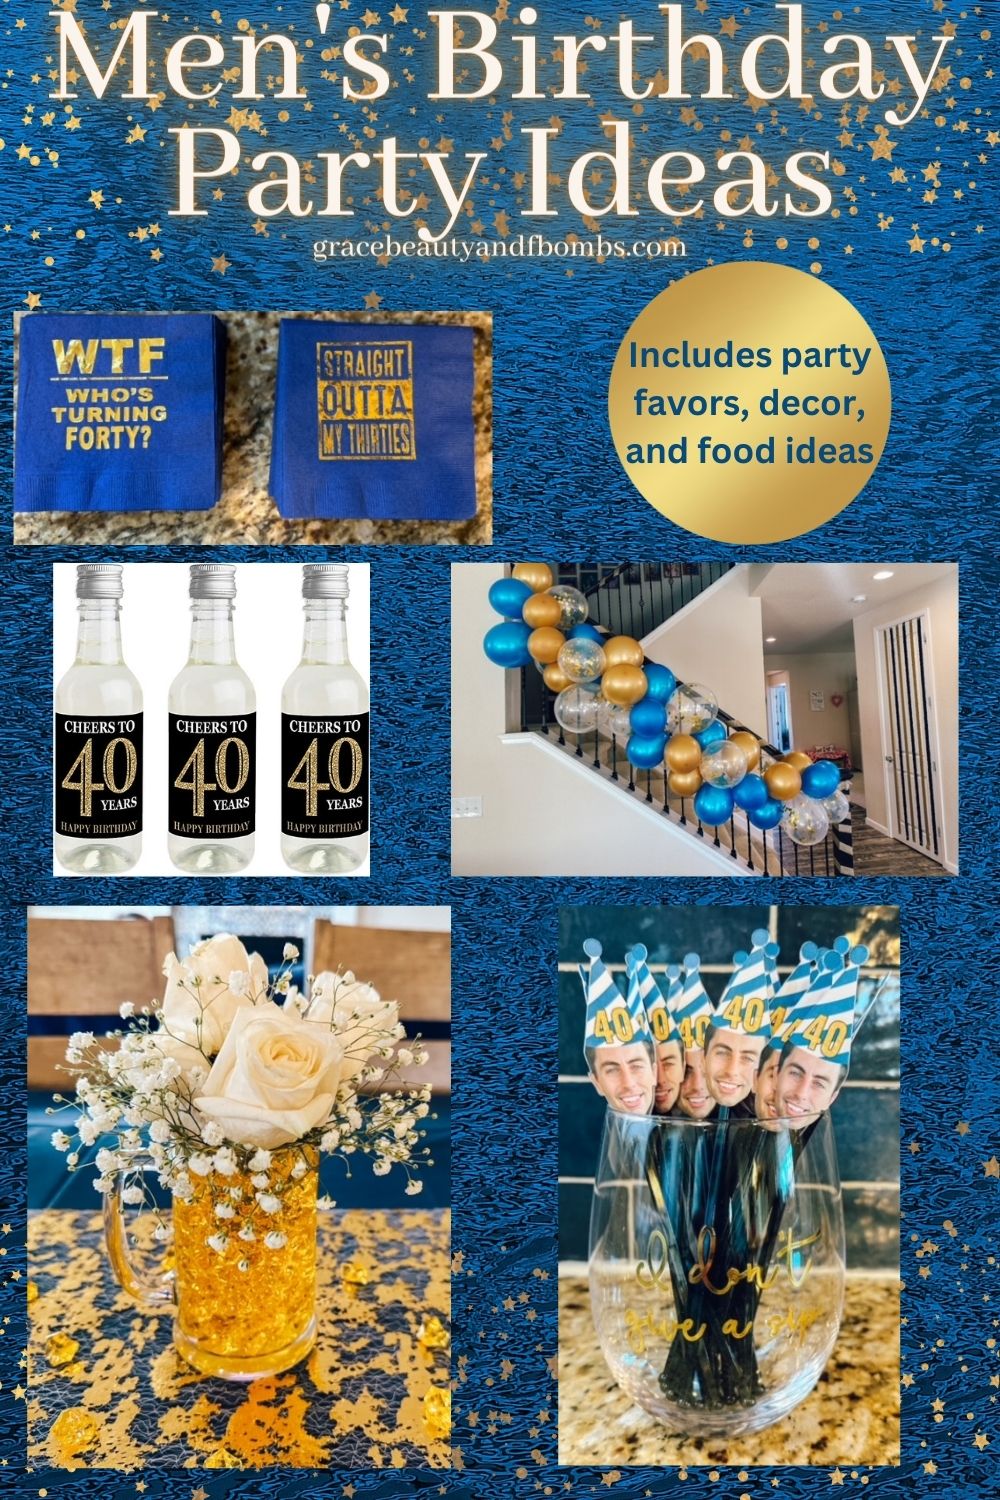 Men's 40th Birthday Party Ideas - Grace, Beauty, and F Bombs